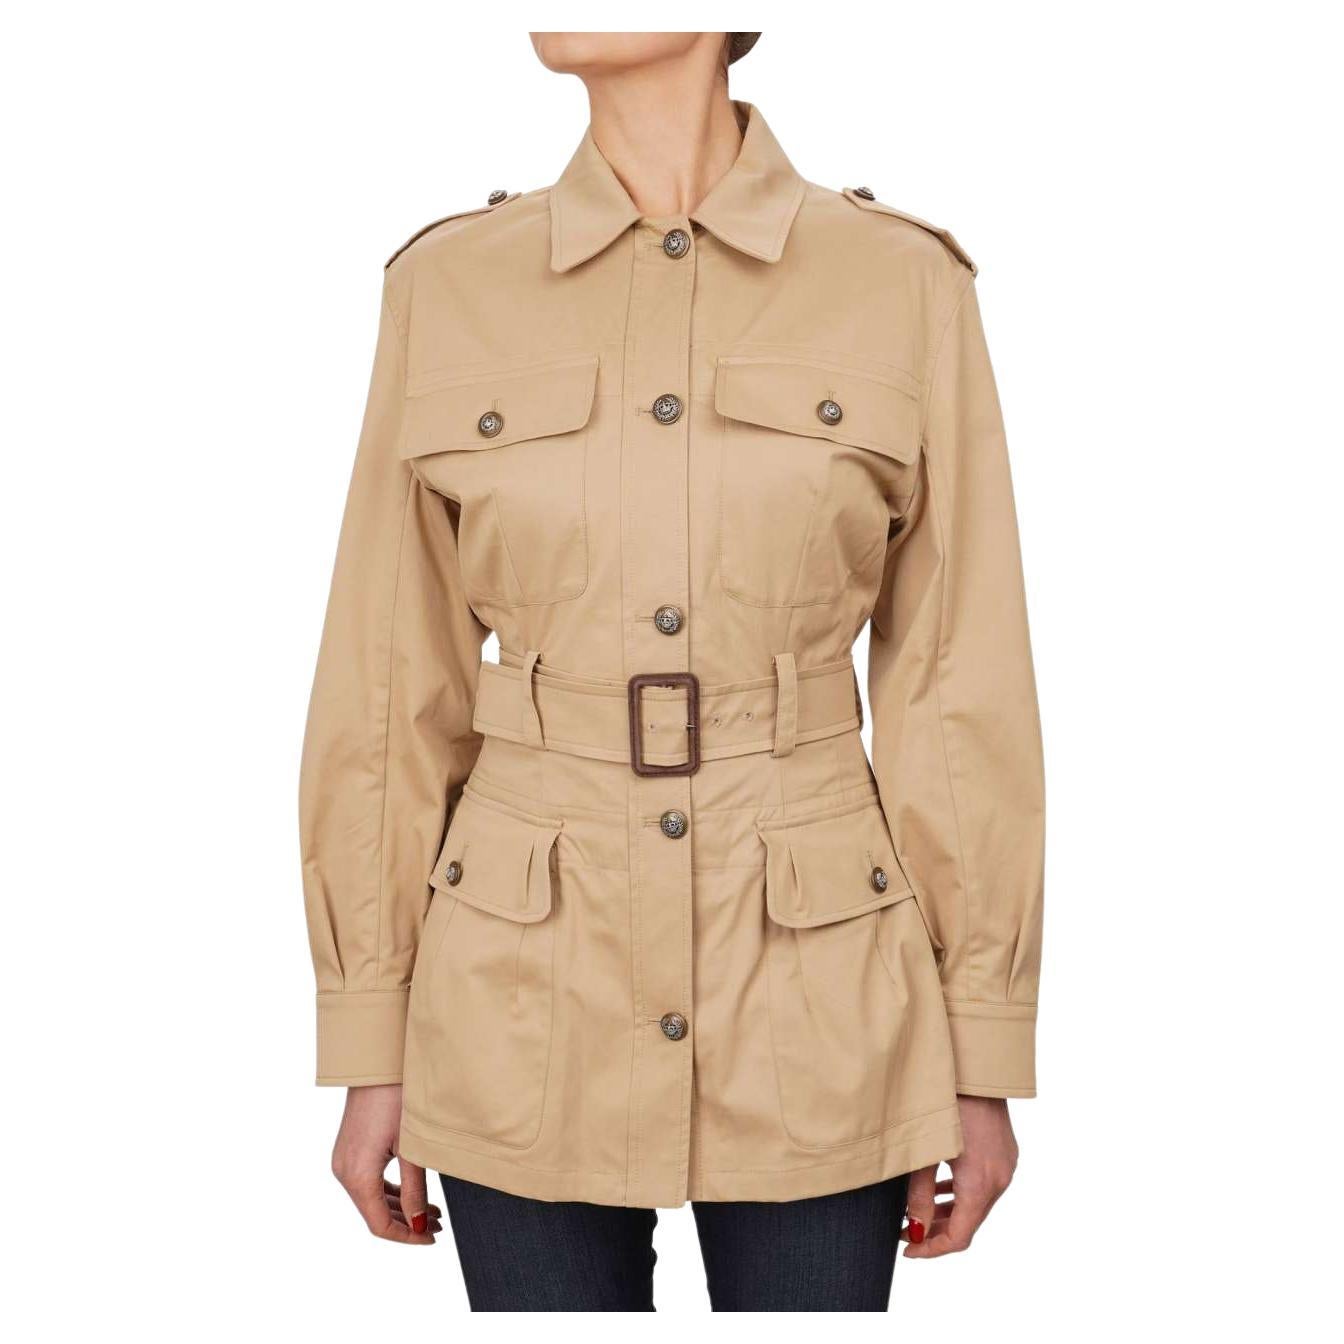 Dolce & Gabbana Metal Crown Buttons Trench Coat Safari Jacket Beige IT 50 For Sale